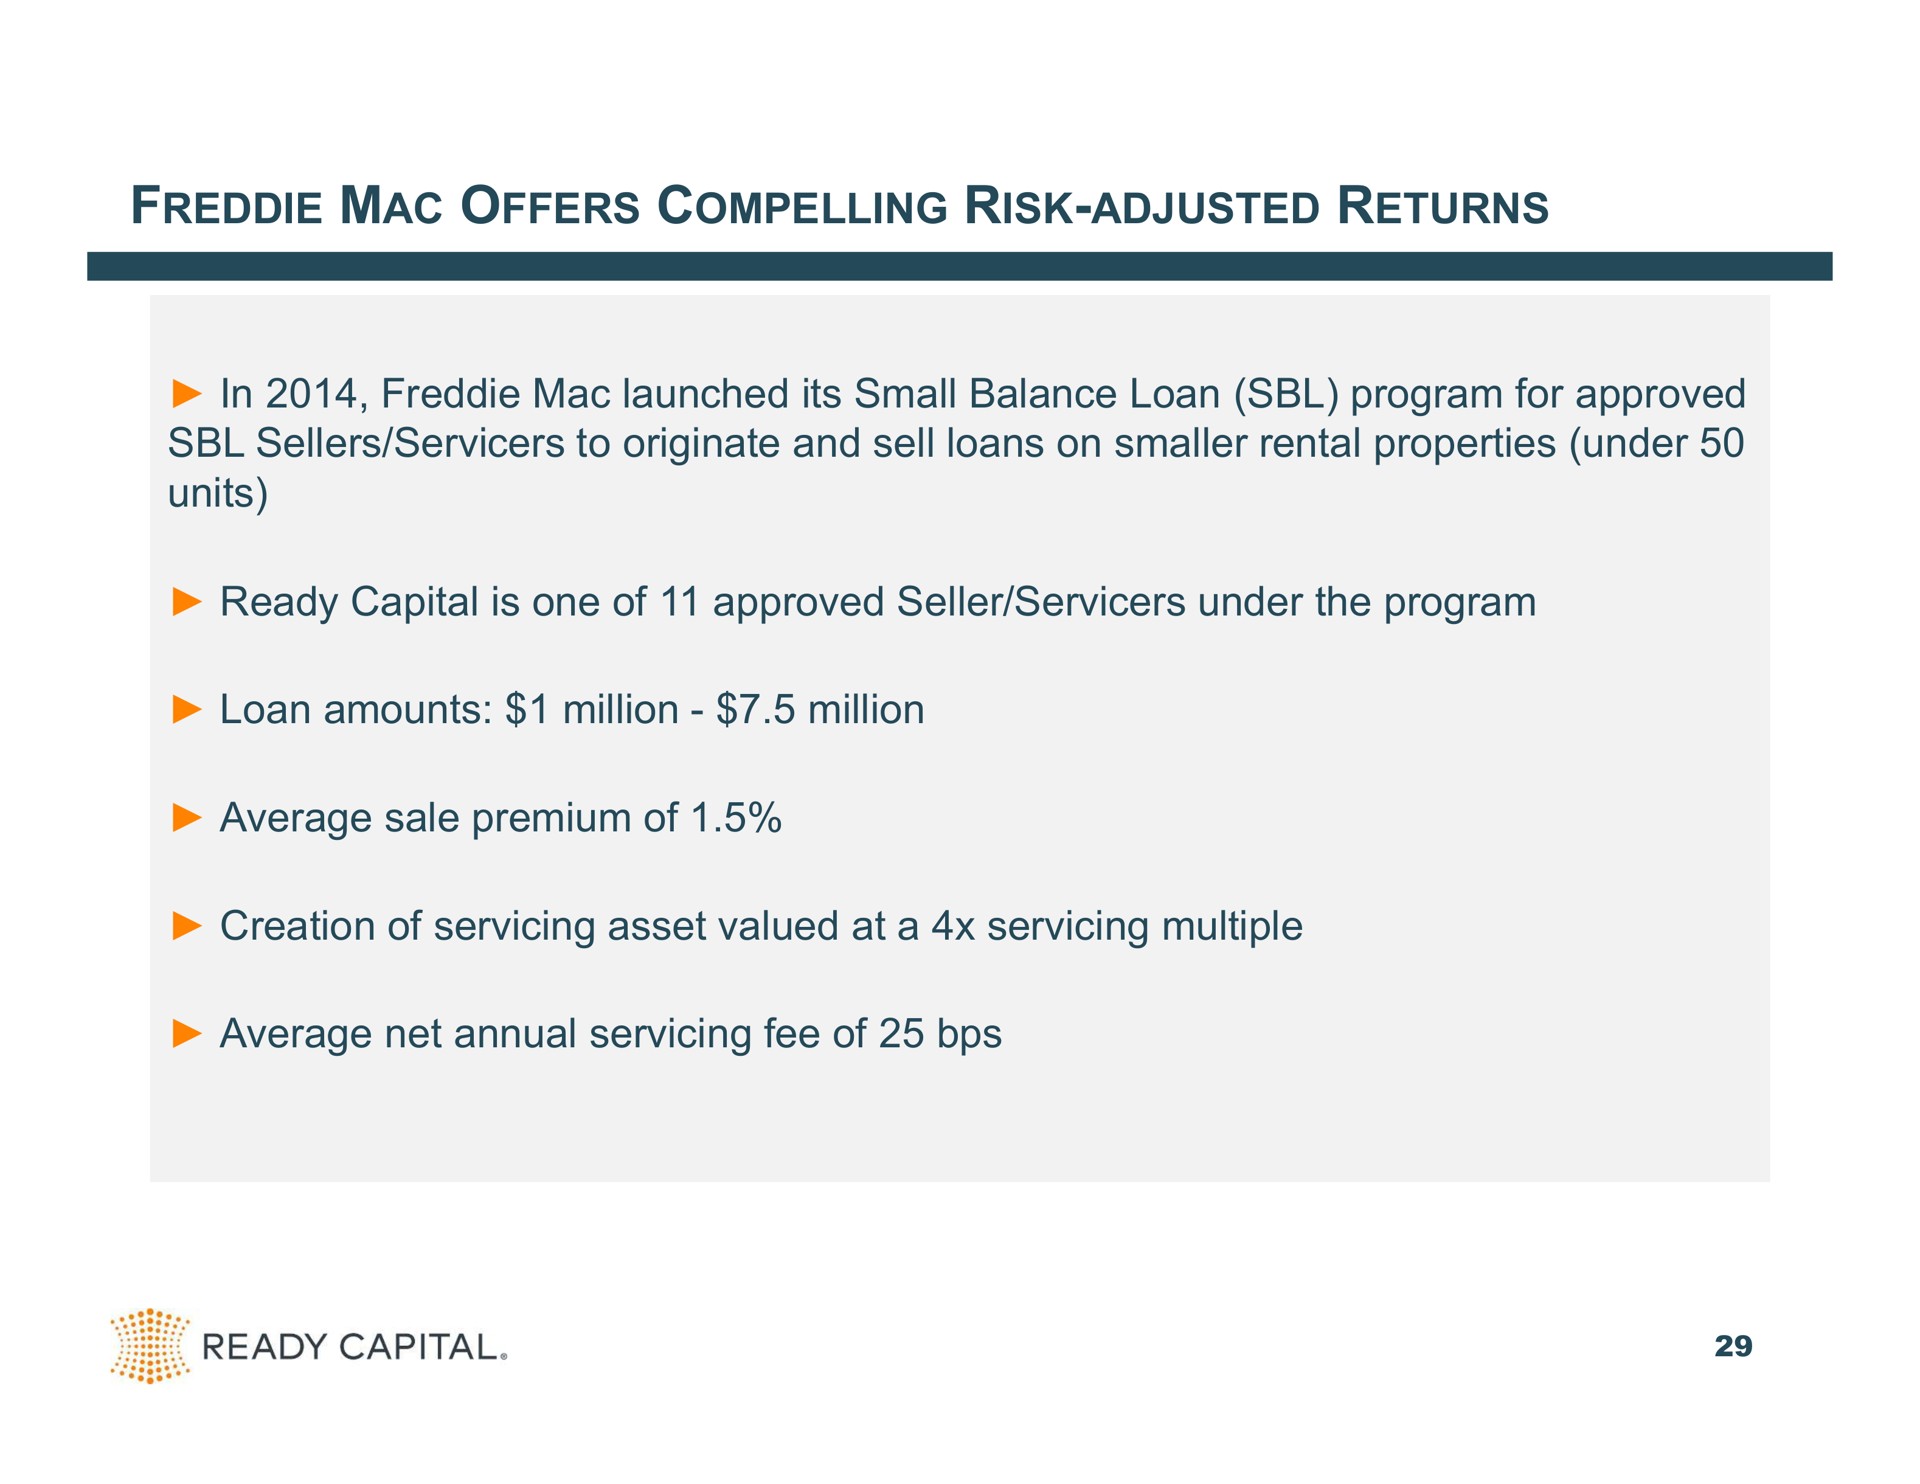 mac offers compelling risk adjusted returns in mac launched its small balance loan program for approved sellers to originate and sell loans on smaller rental properties under units ready capital is one of approved seller under the program loan amounts million million average sale premium of creation of servicing asset valued at a servicing multiple average net annual servicing fee of | Ready Capital